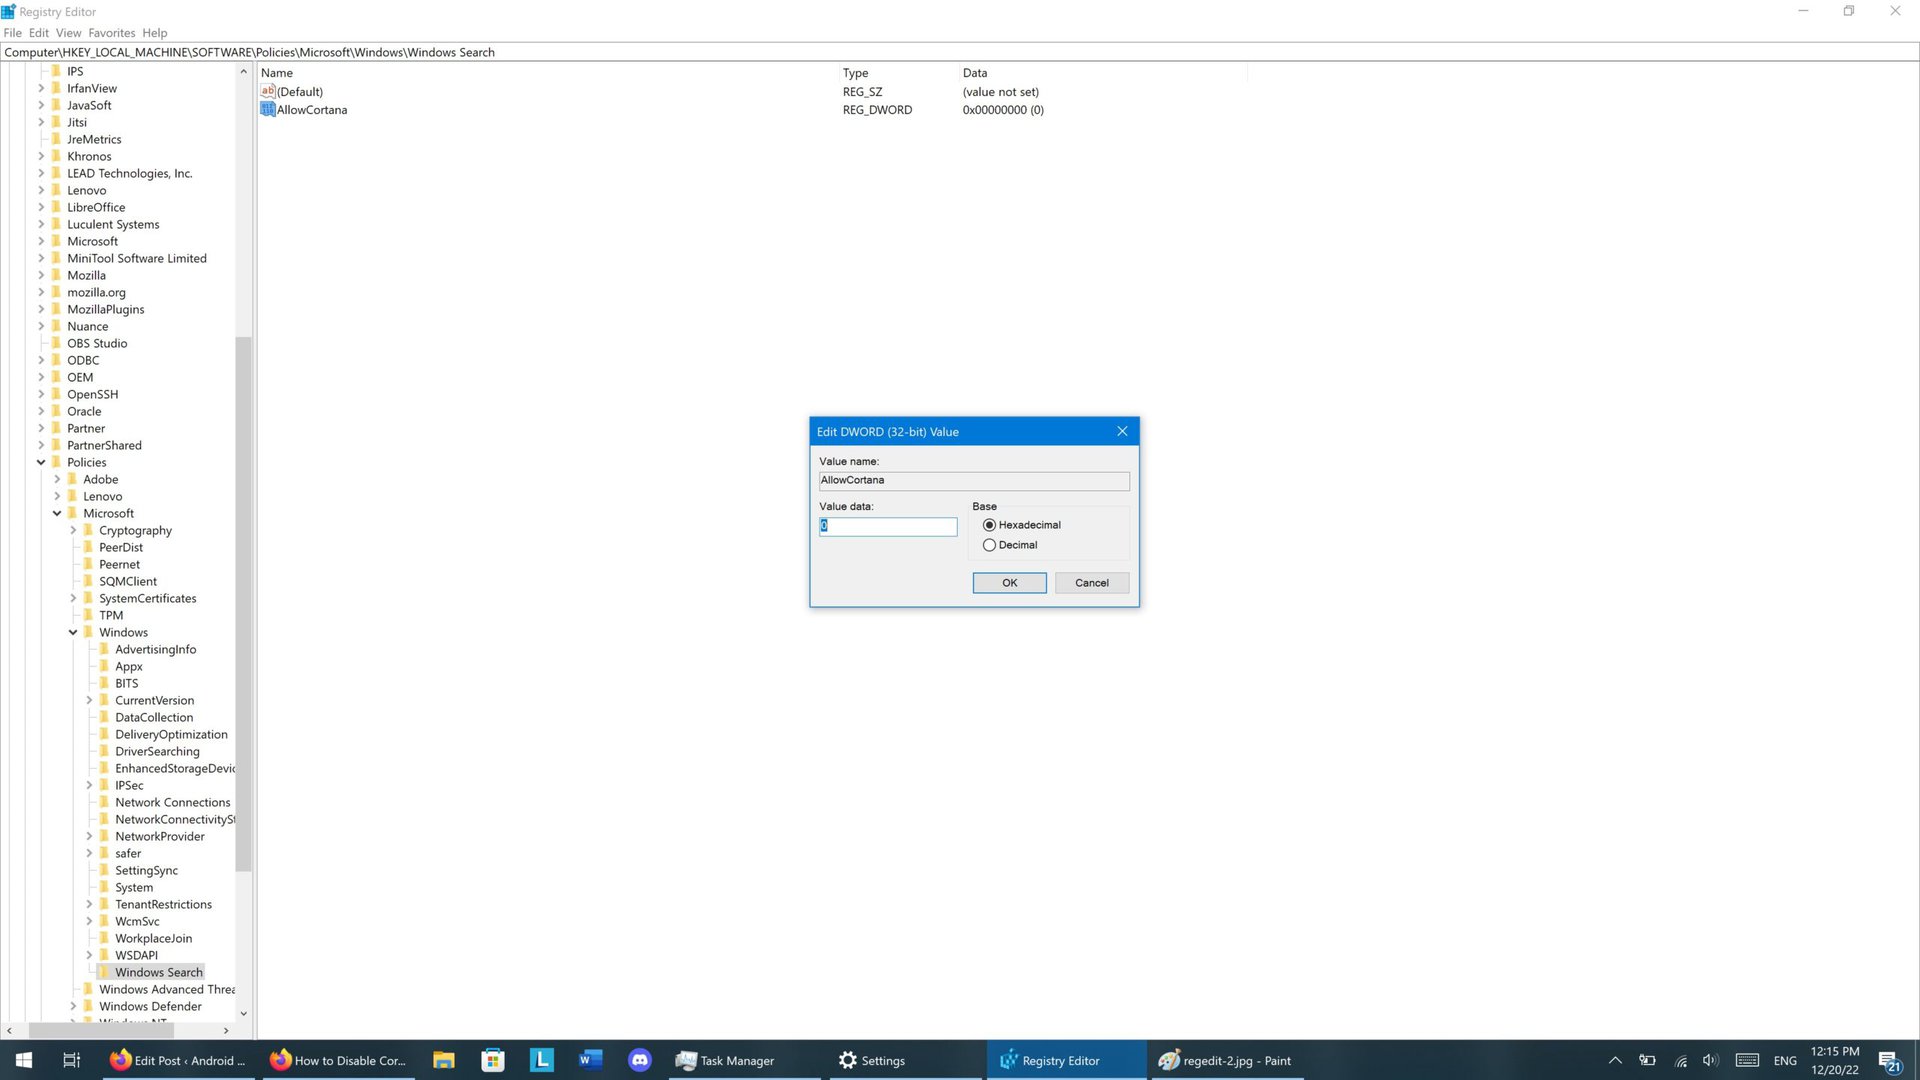 A screenshot of the Windows 10 regedit app showing the options available for the Cortana entry.